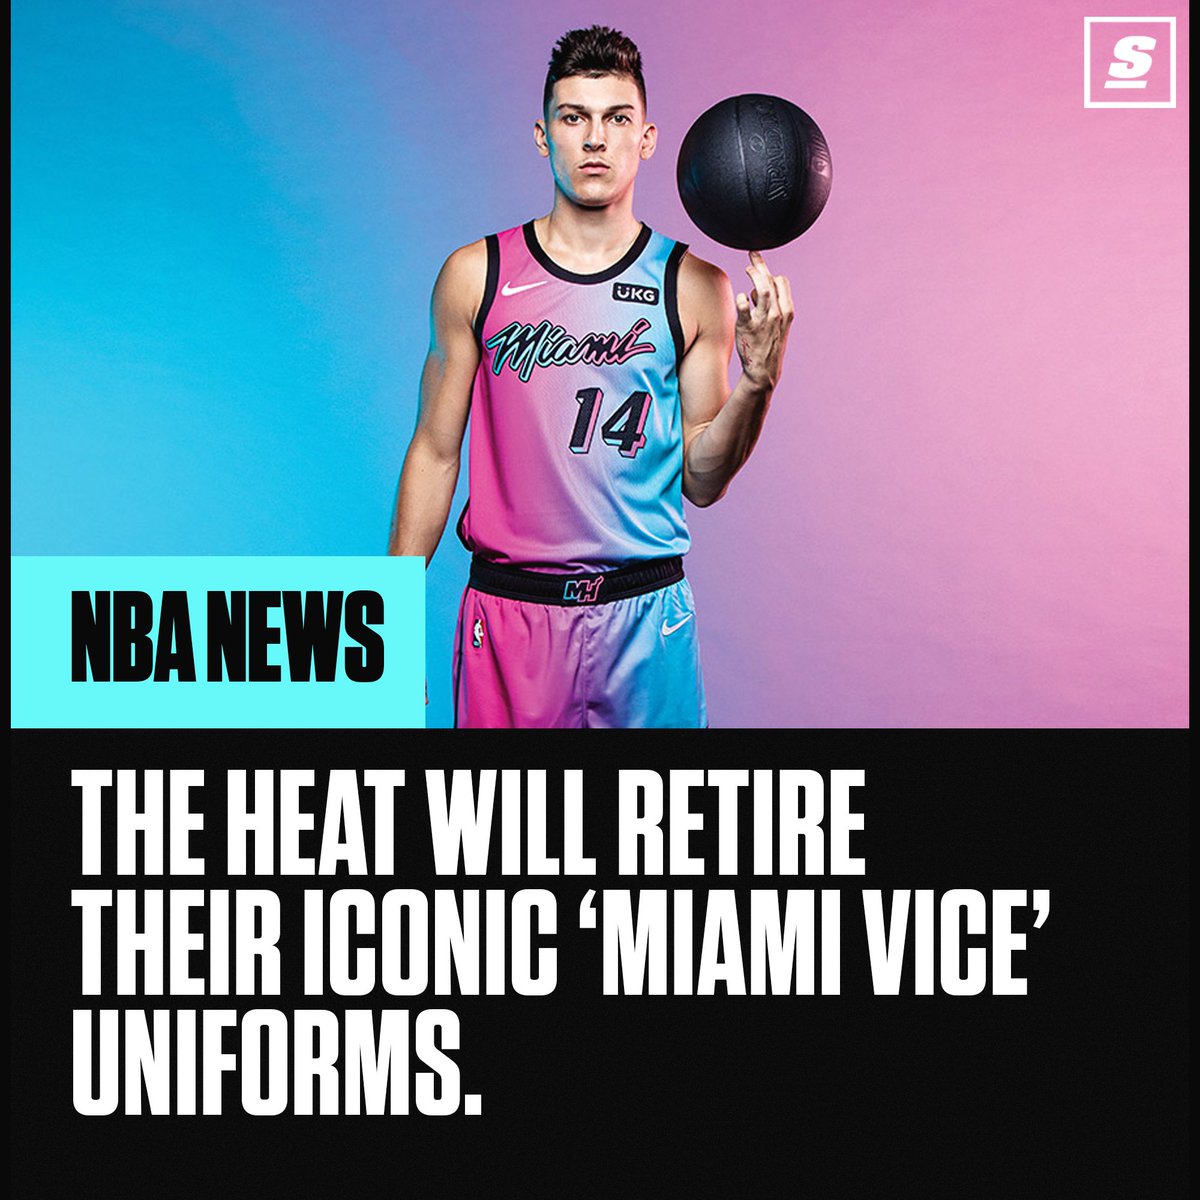 The Heat Will Retire Their Iconic 'Miami Vice' Uniforms